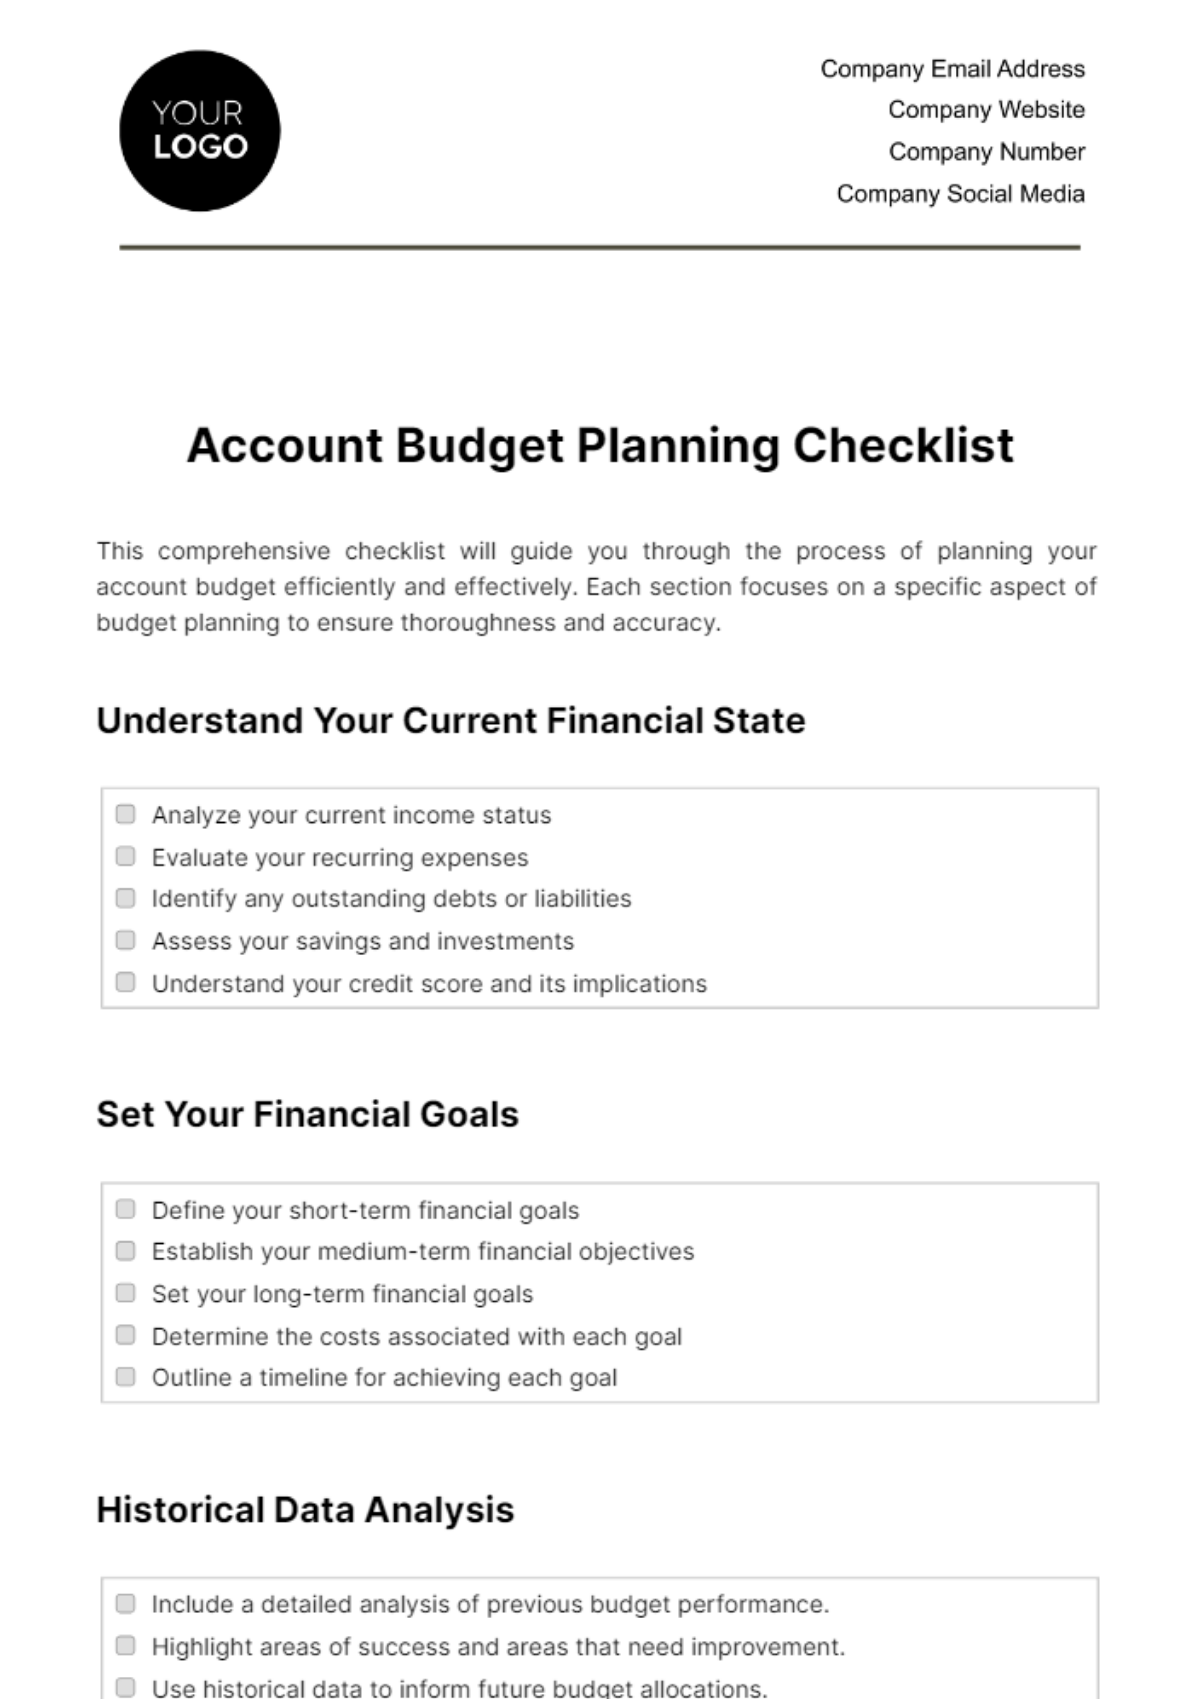 Free Account Budget Planning Checklist Template